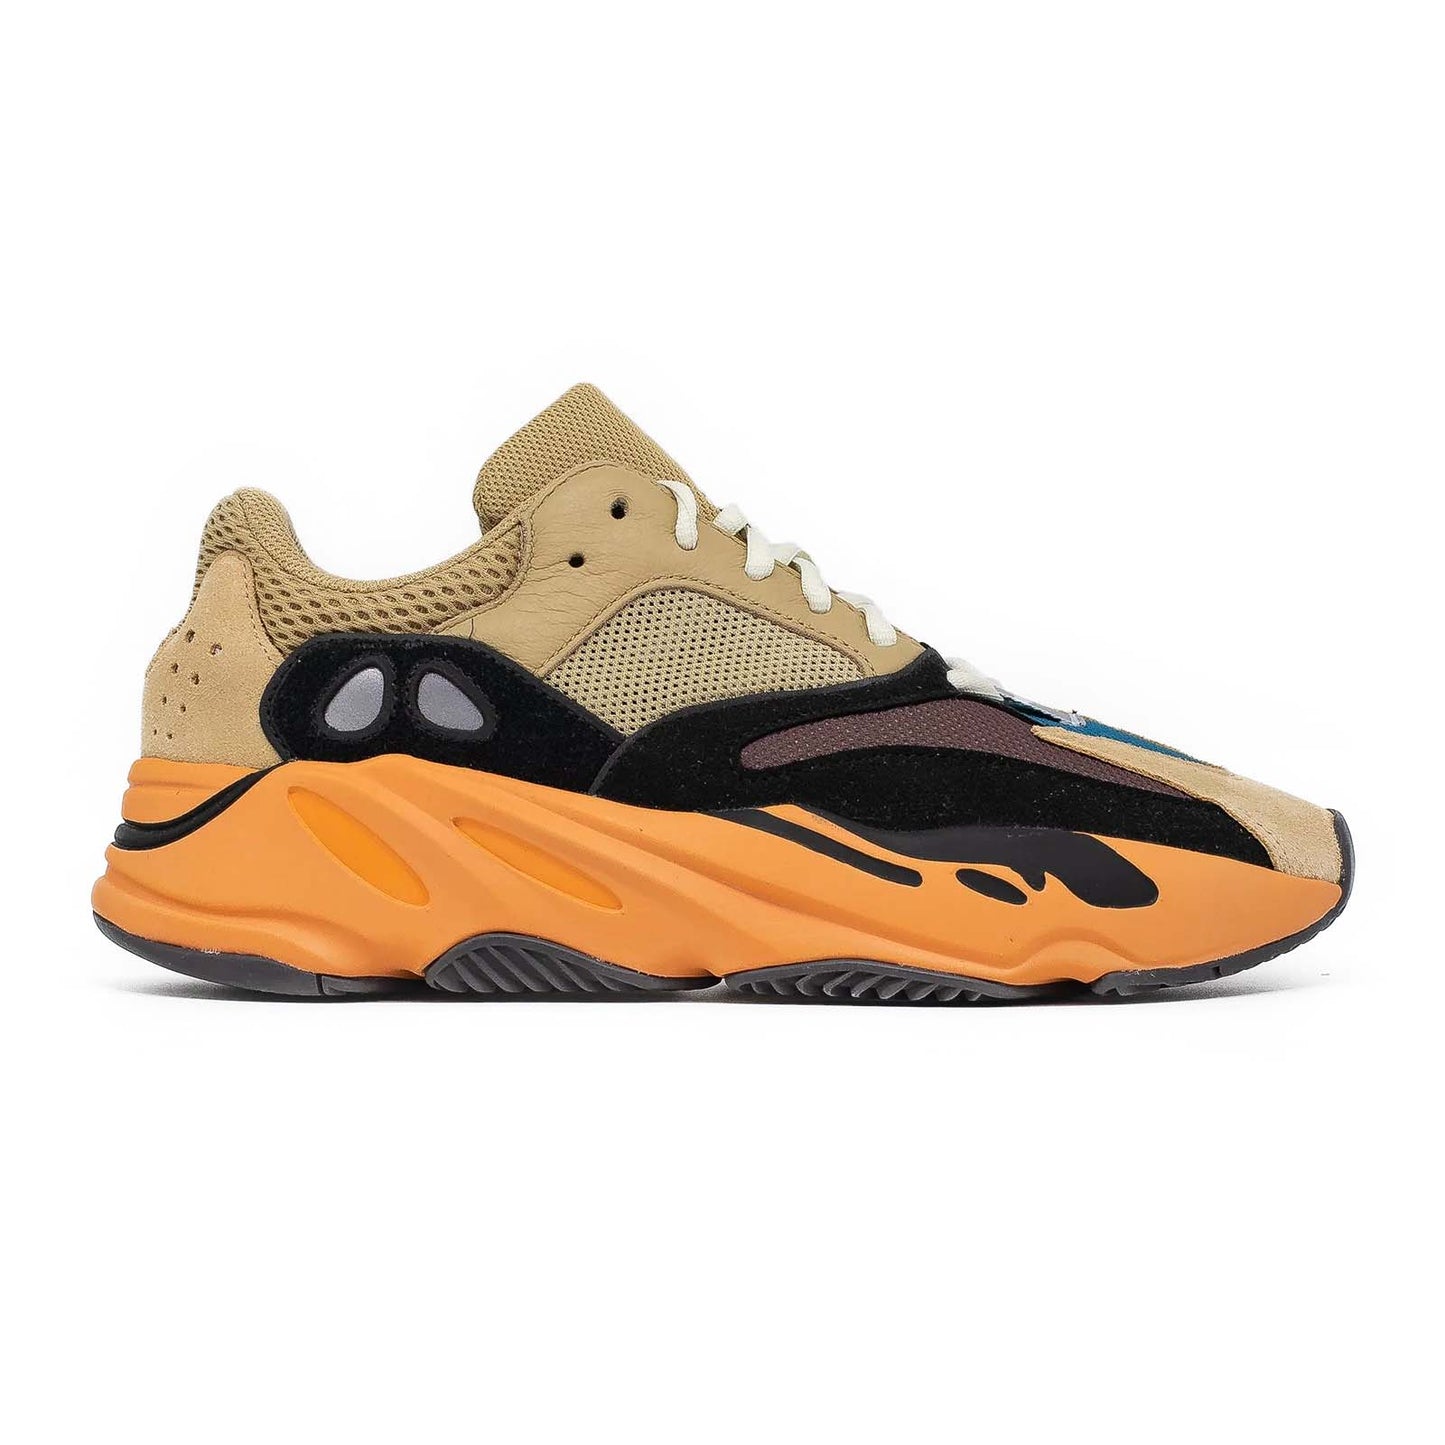 Yeezy Boost 700, Enflame Amber